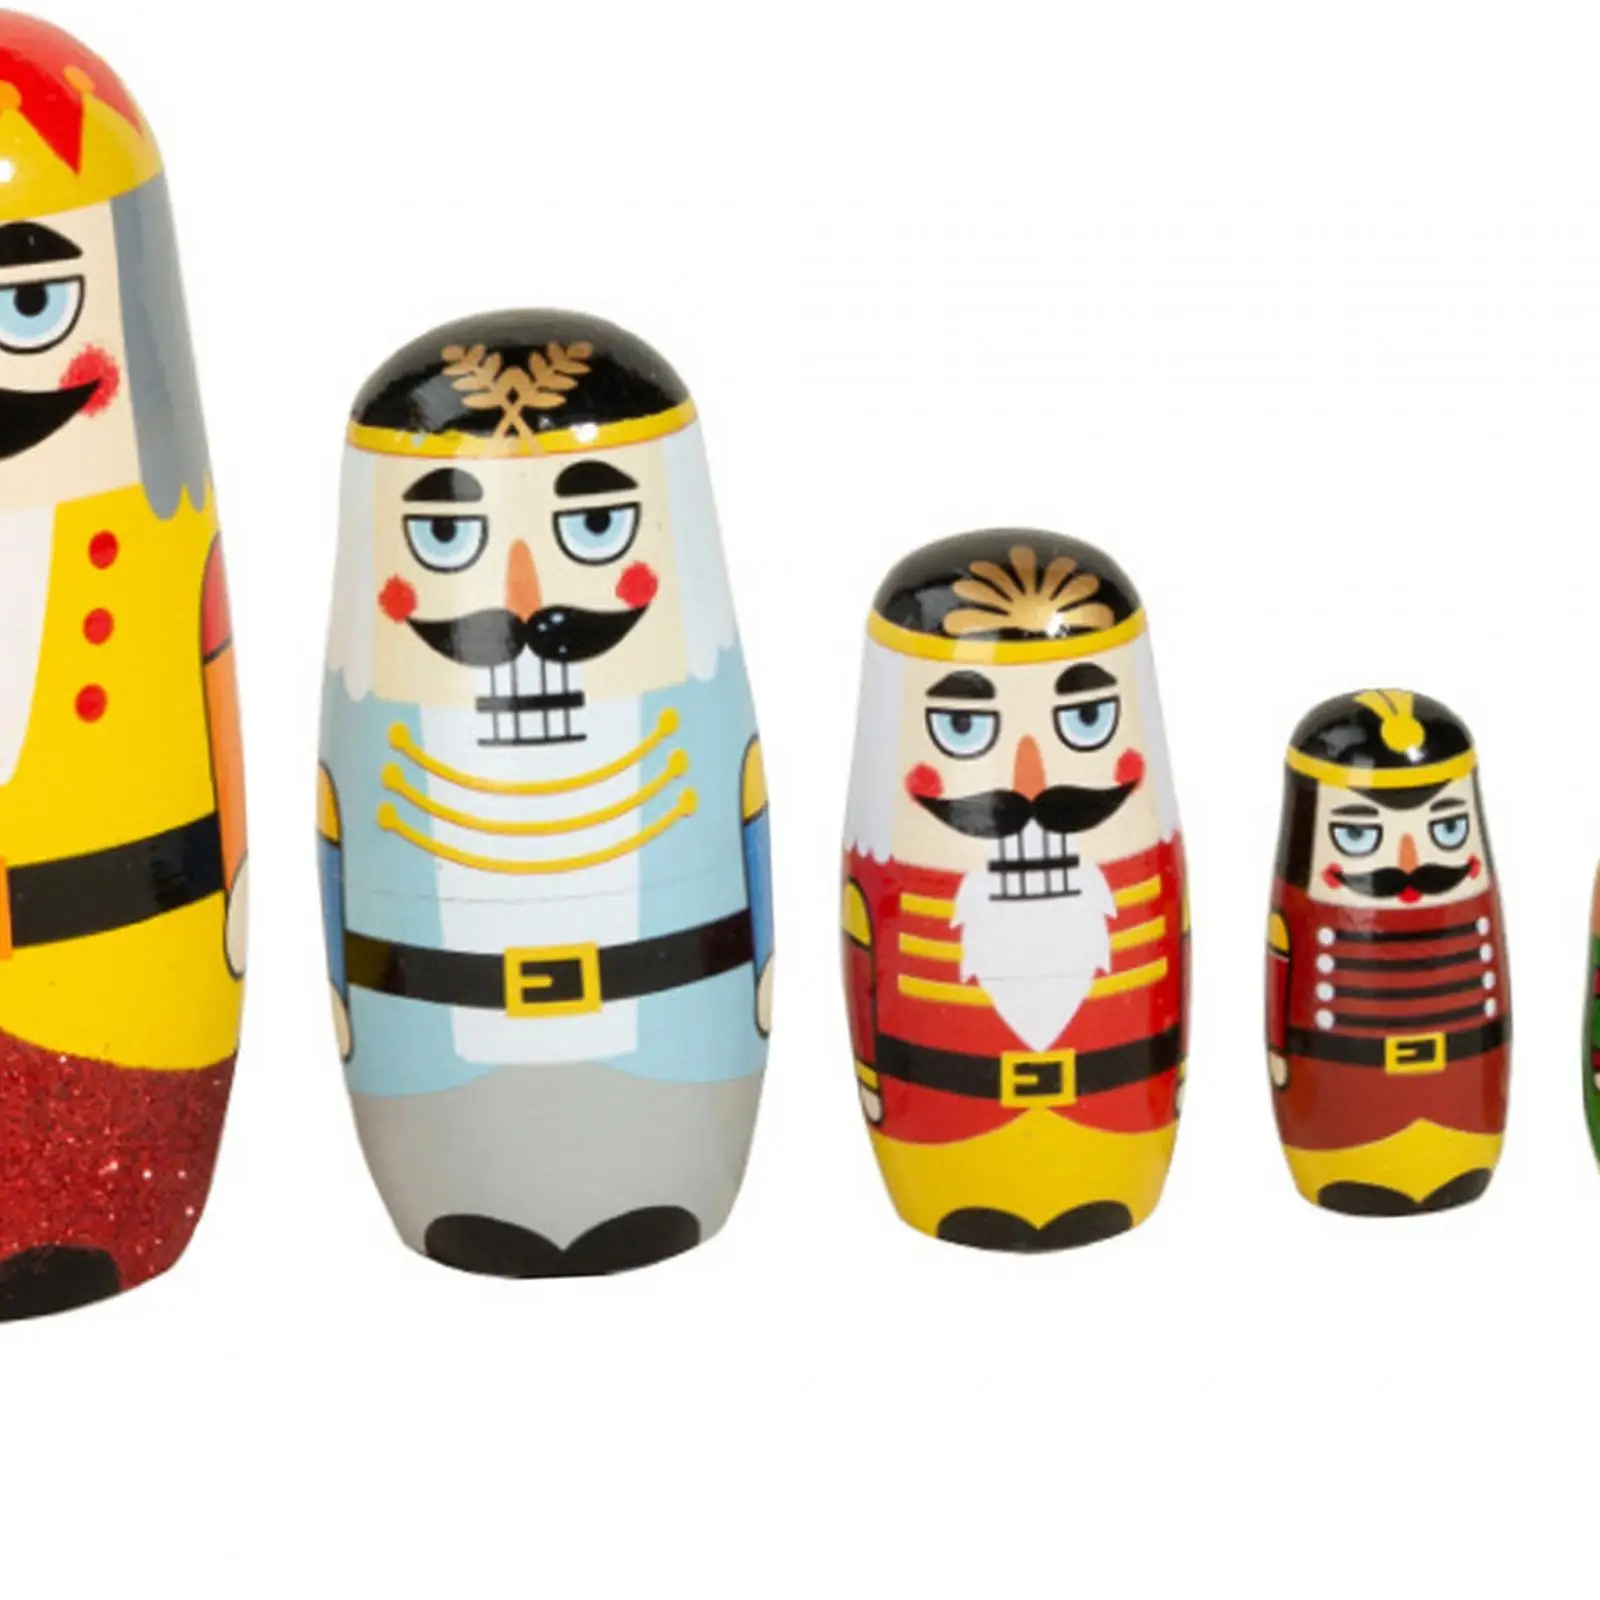 5 Pieces Nutcracker Russian Soldiers Desktop Decor Collectible New Year Holiday Gift Matryoshka Russian Nesting Dolls Decor